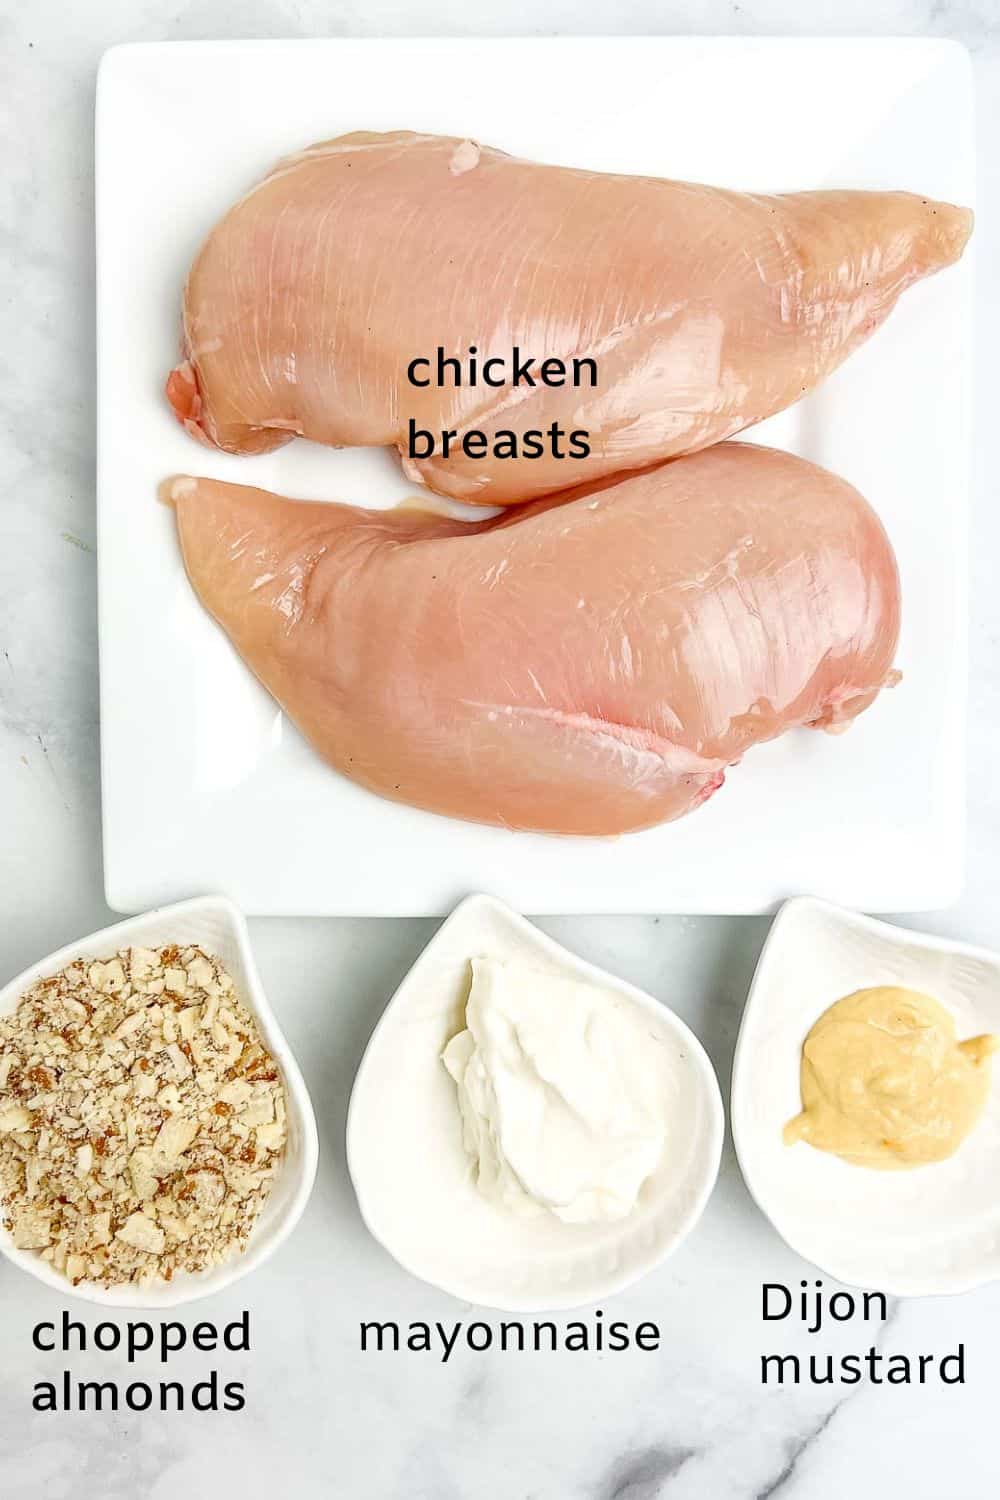 Ingredients for almond-crusted chicken: chicken breasts, chopped almonds, mayonnaise and Dijon mustard.